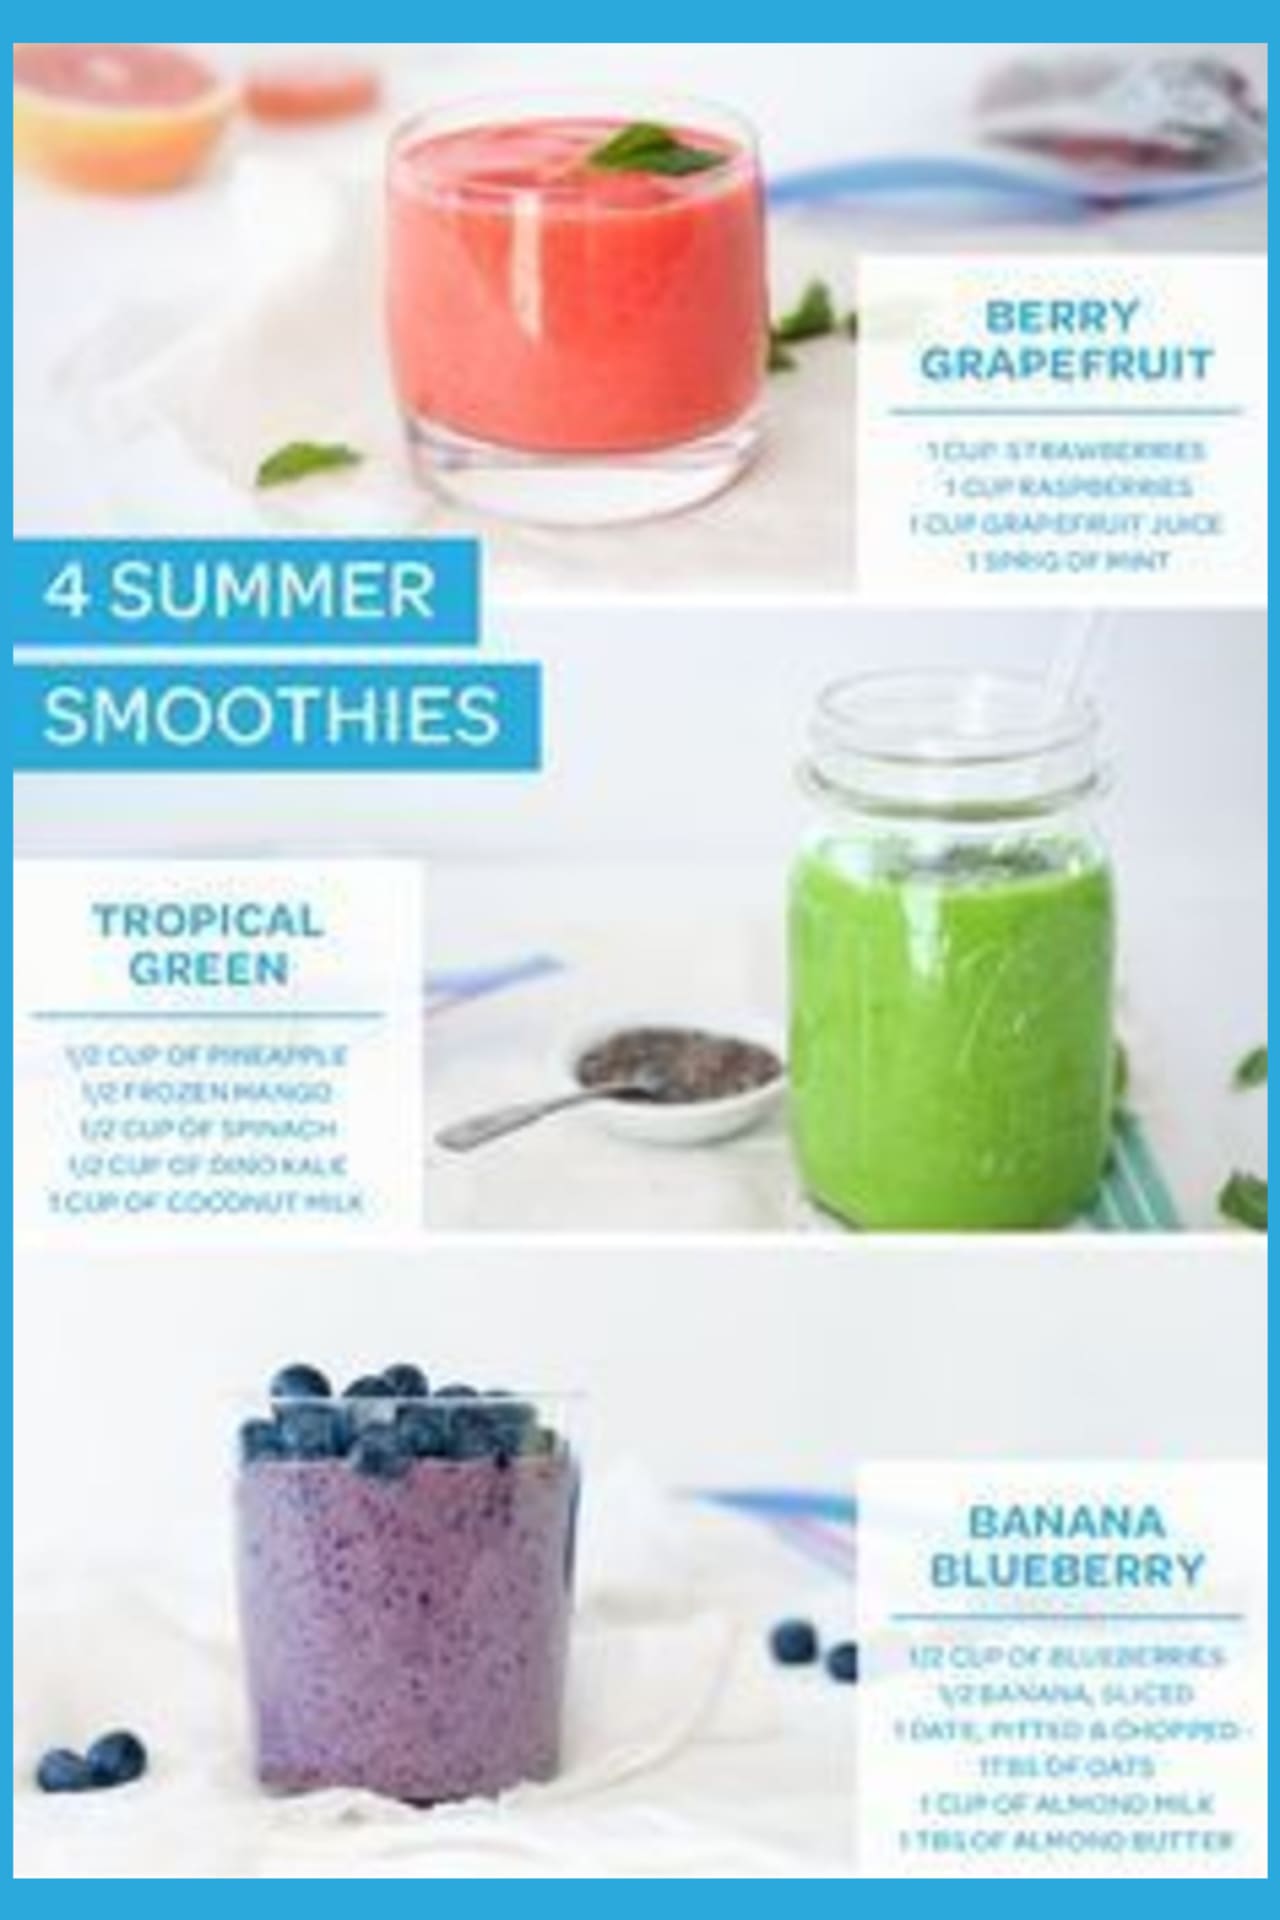 quick and easy smoothie recipes - healthy smoothies recipes for breakfast